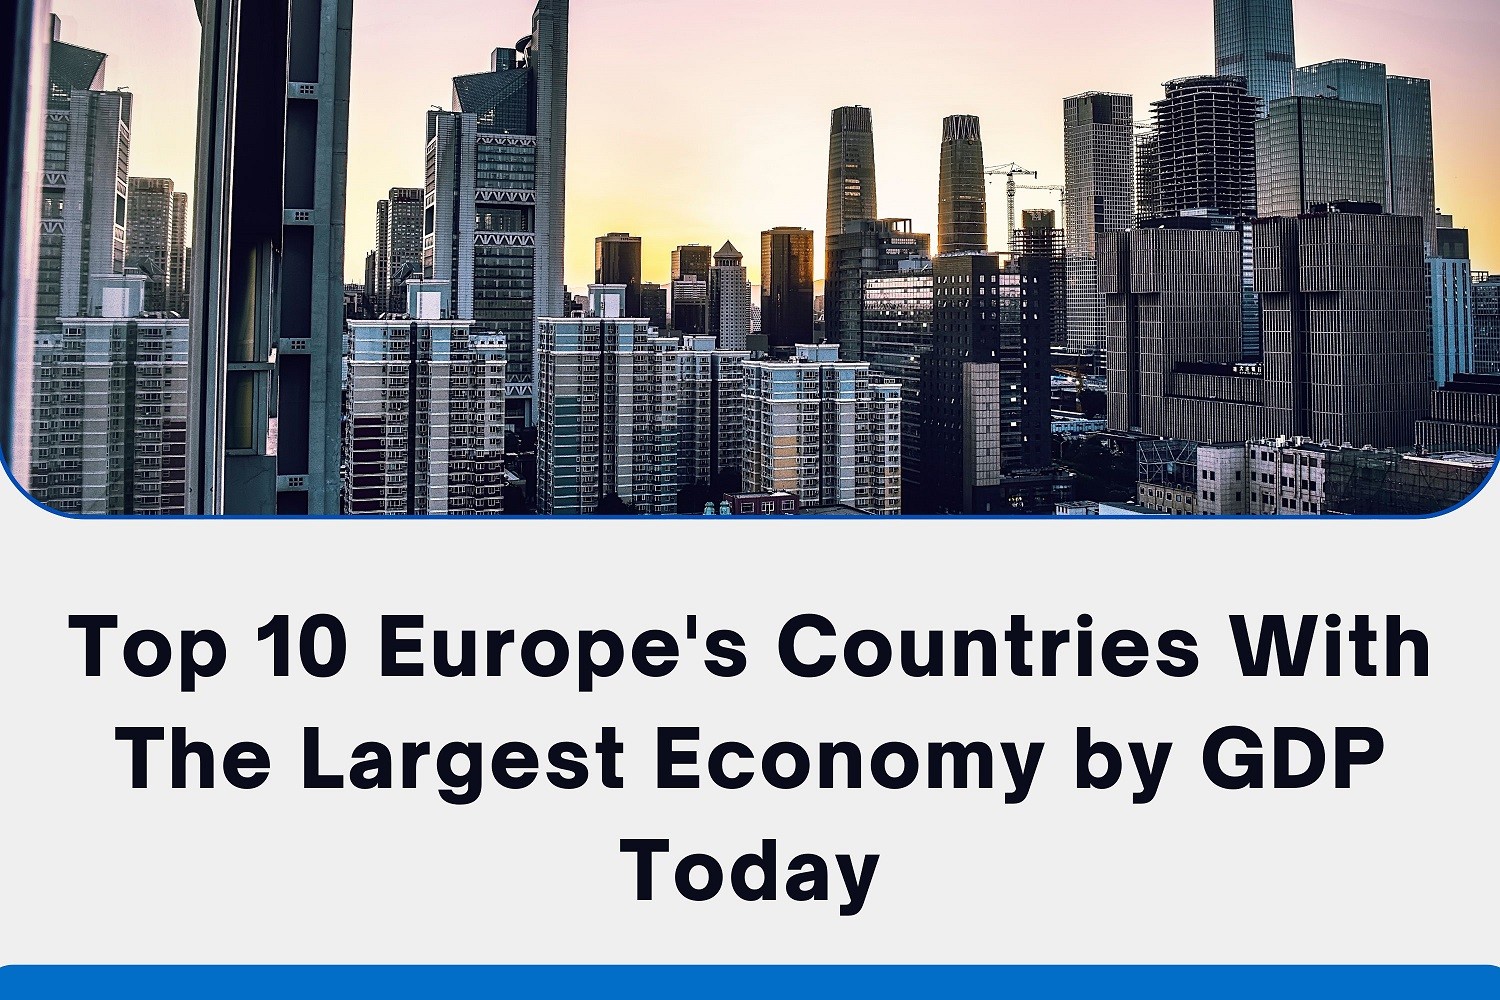 Top 10 European Countries with the Largest Economy by GDP Today